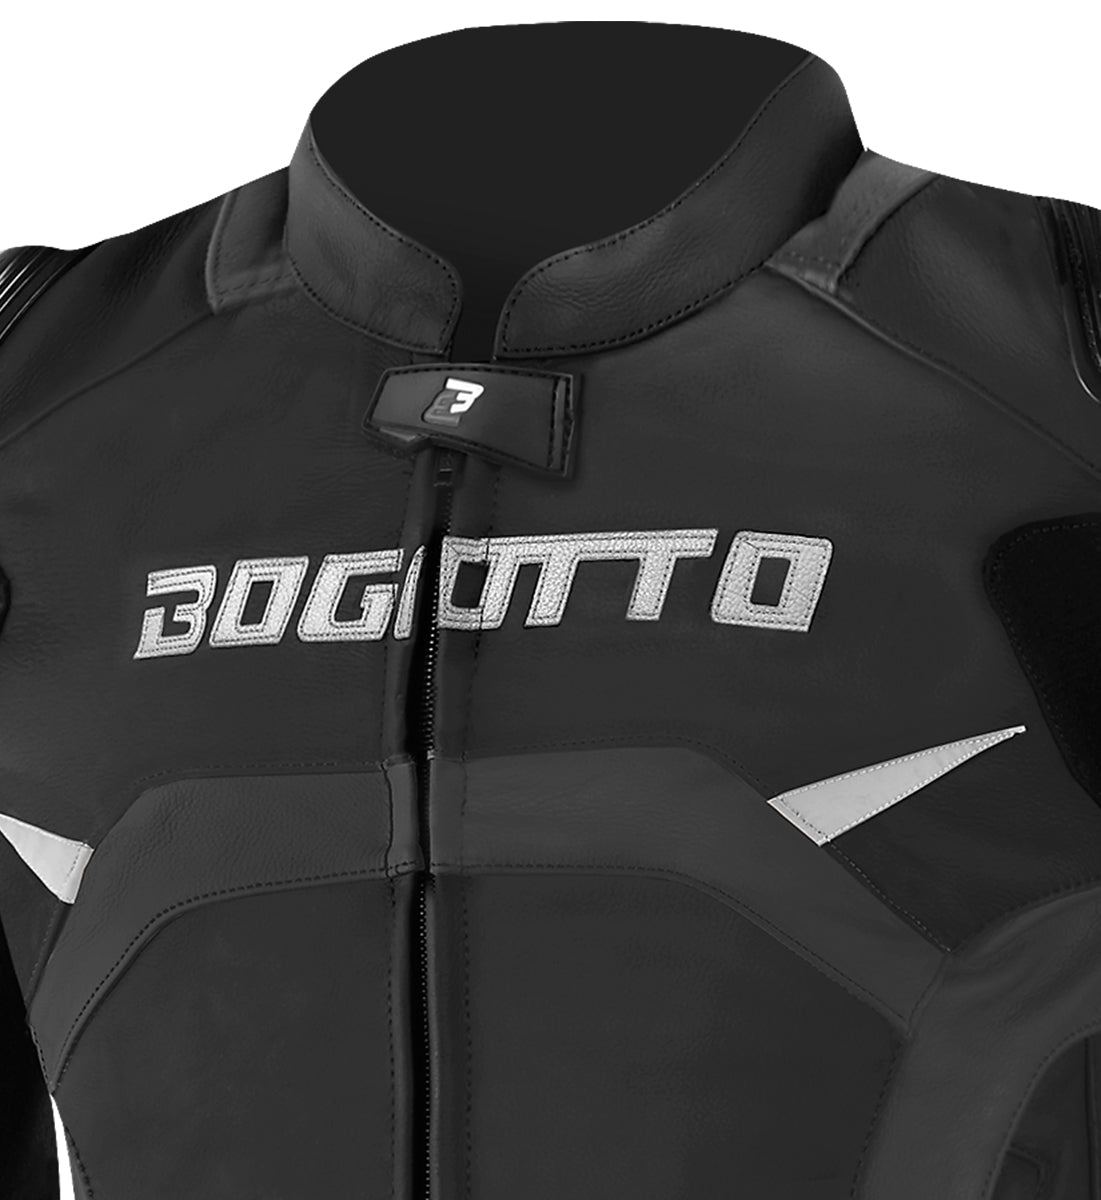 Bogotto Misano Two Piece Motorcycle Leather Suit#color_black-white-red-blue